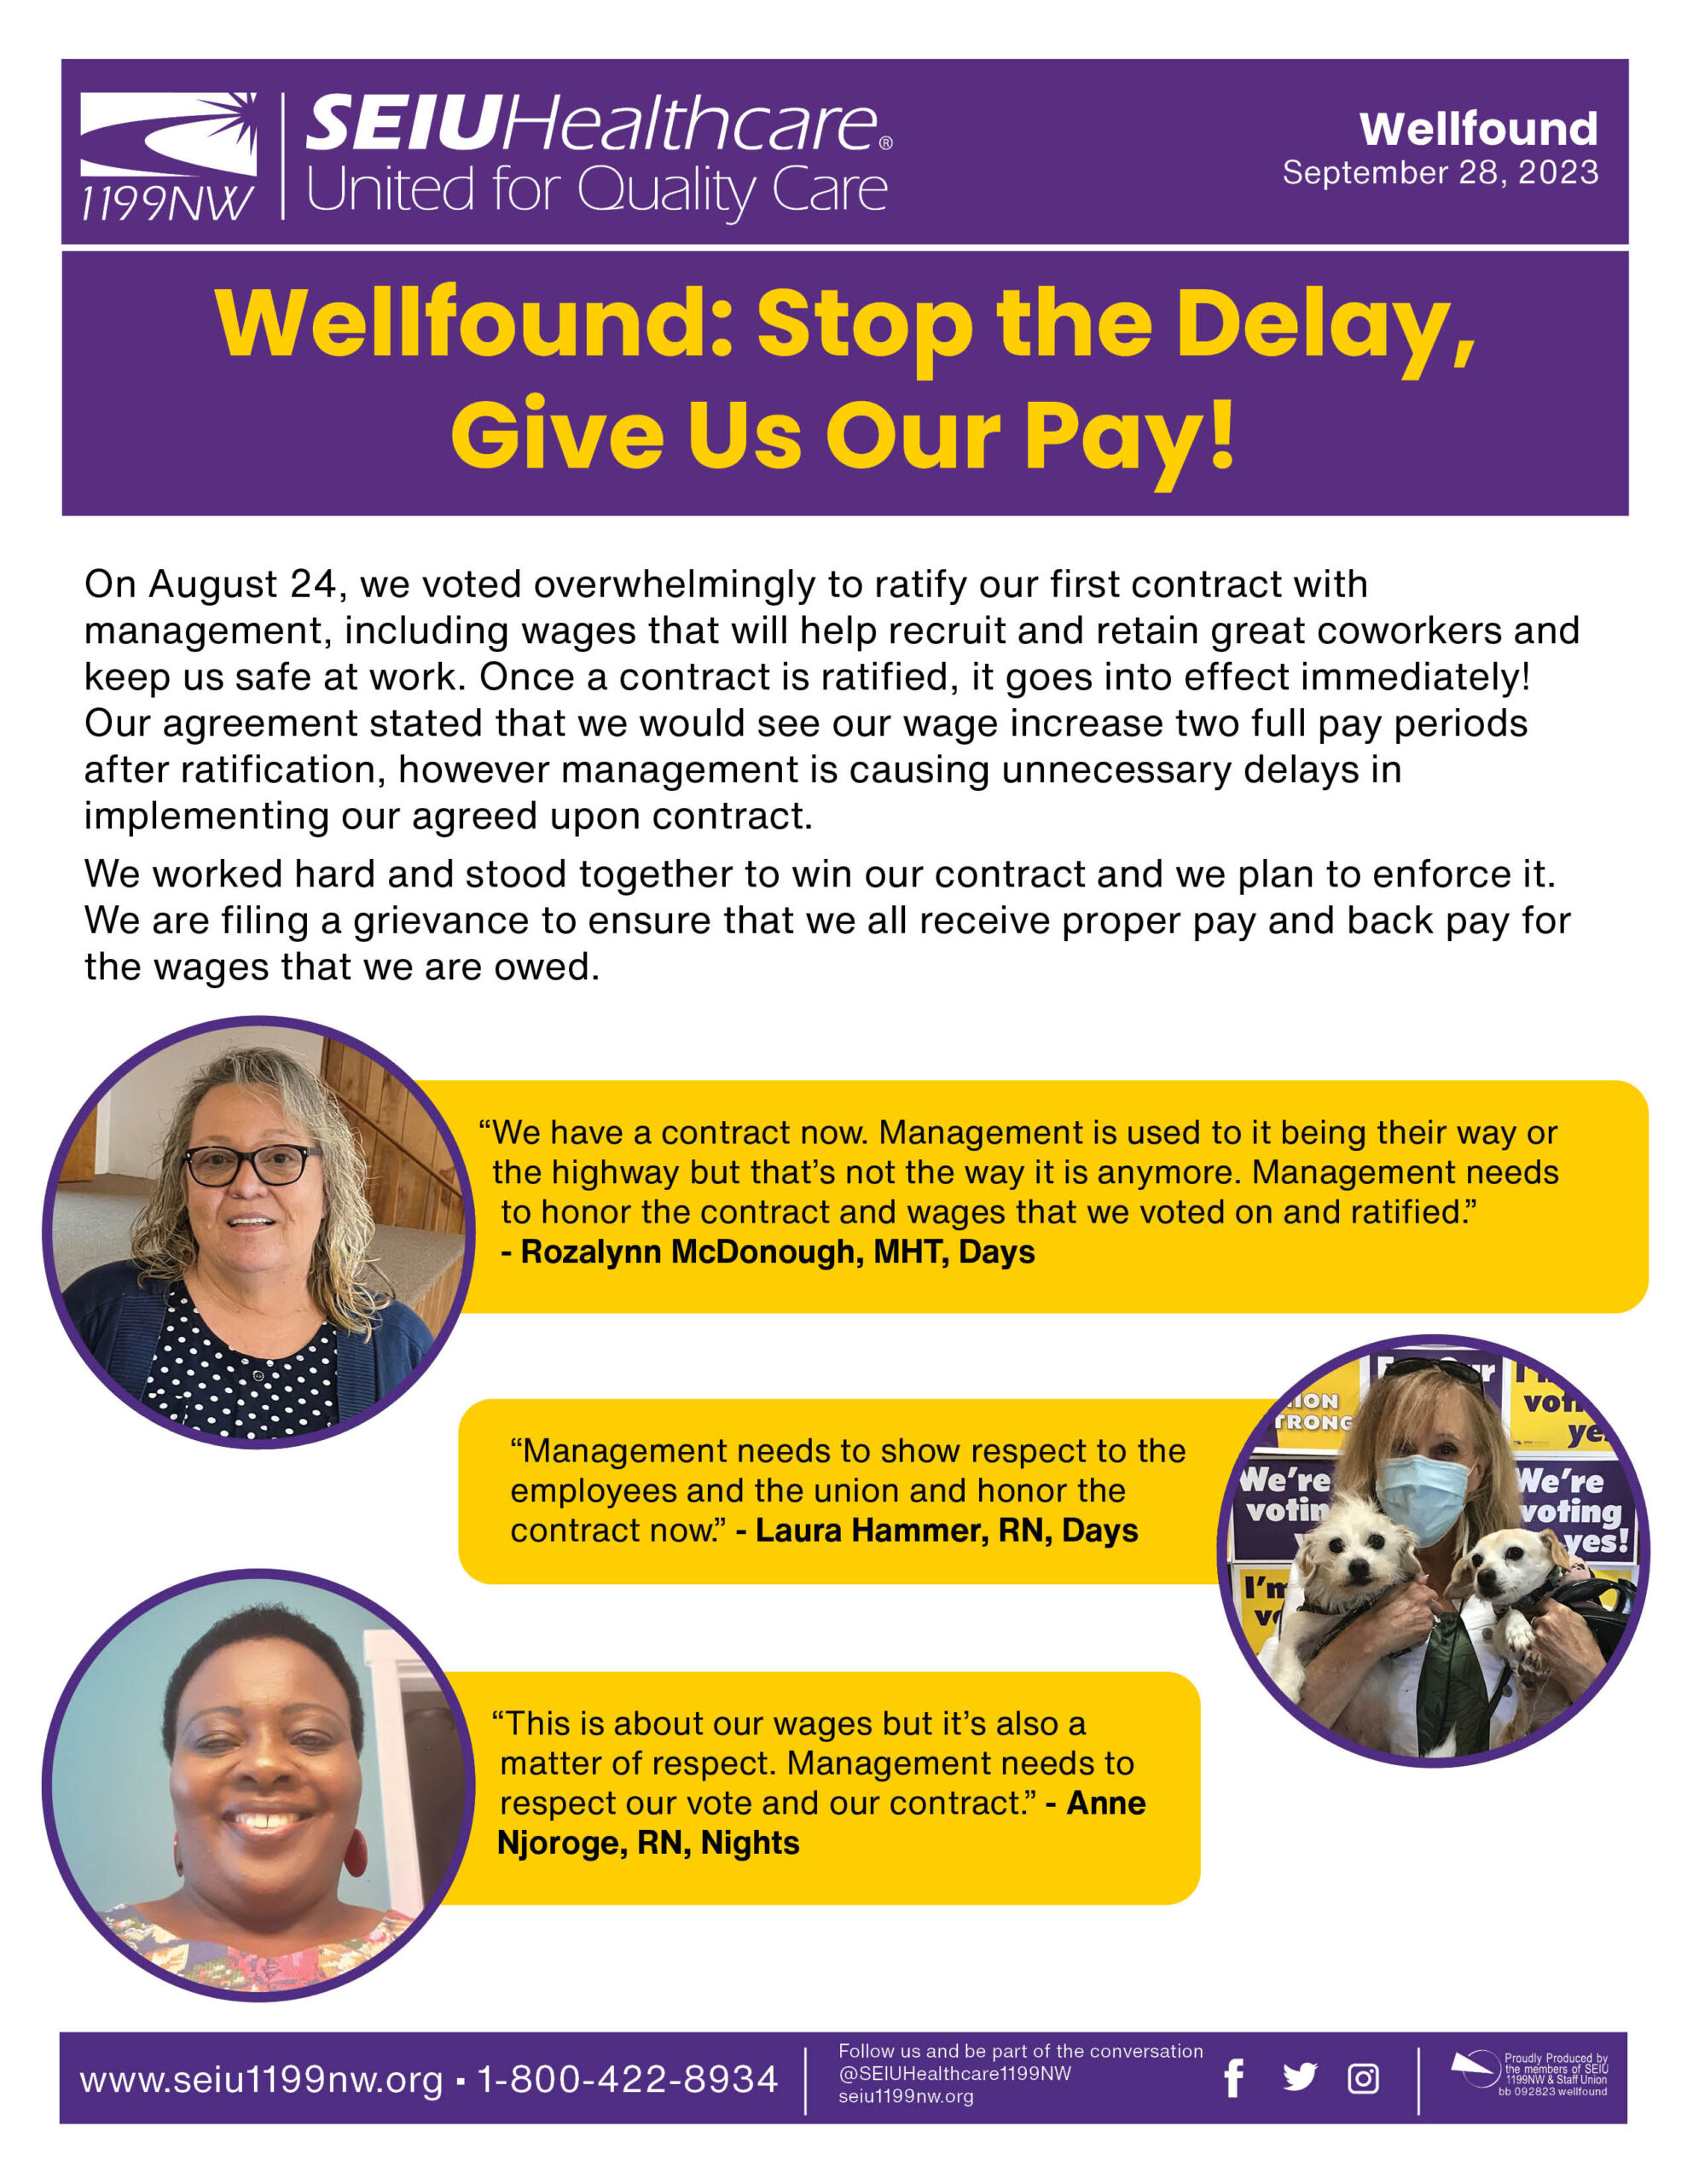 Wellfound: Stop the Delay, Give Us Our Pay!